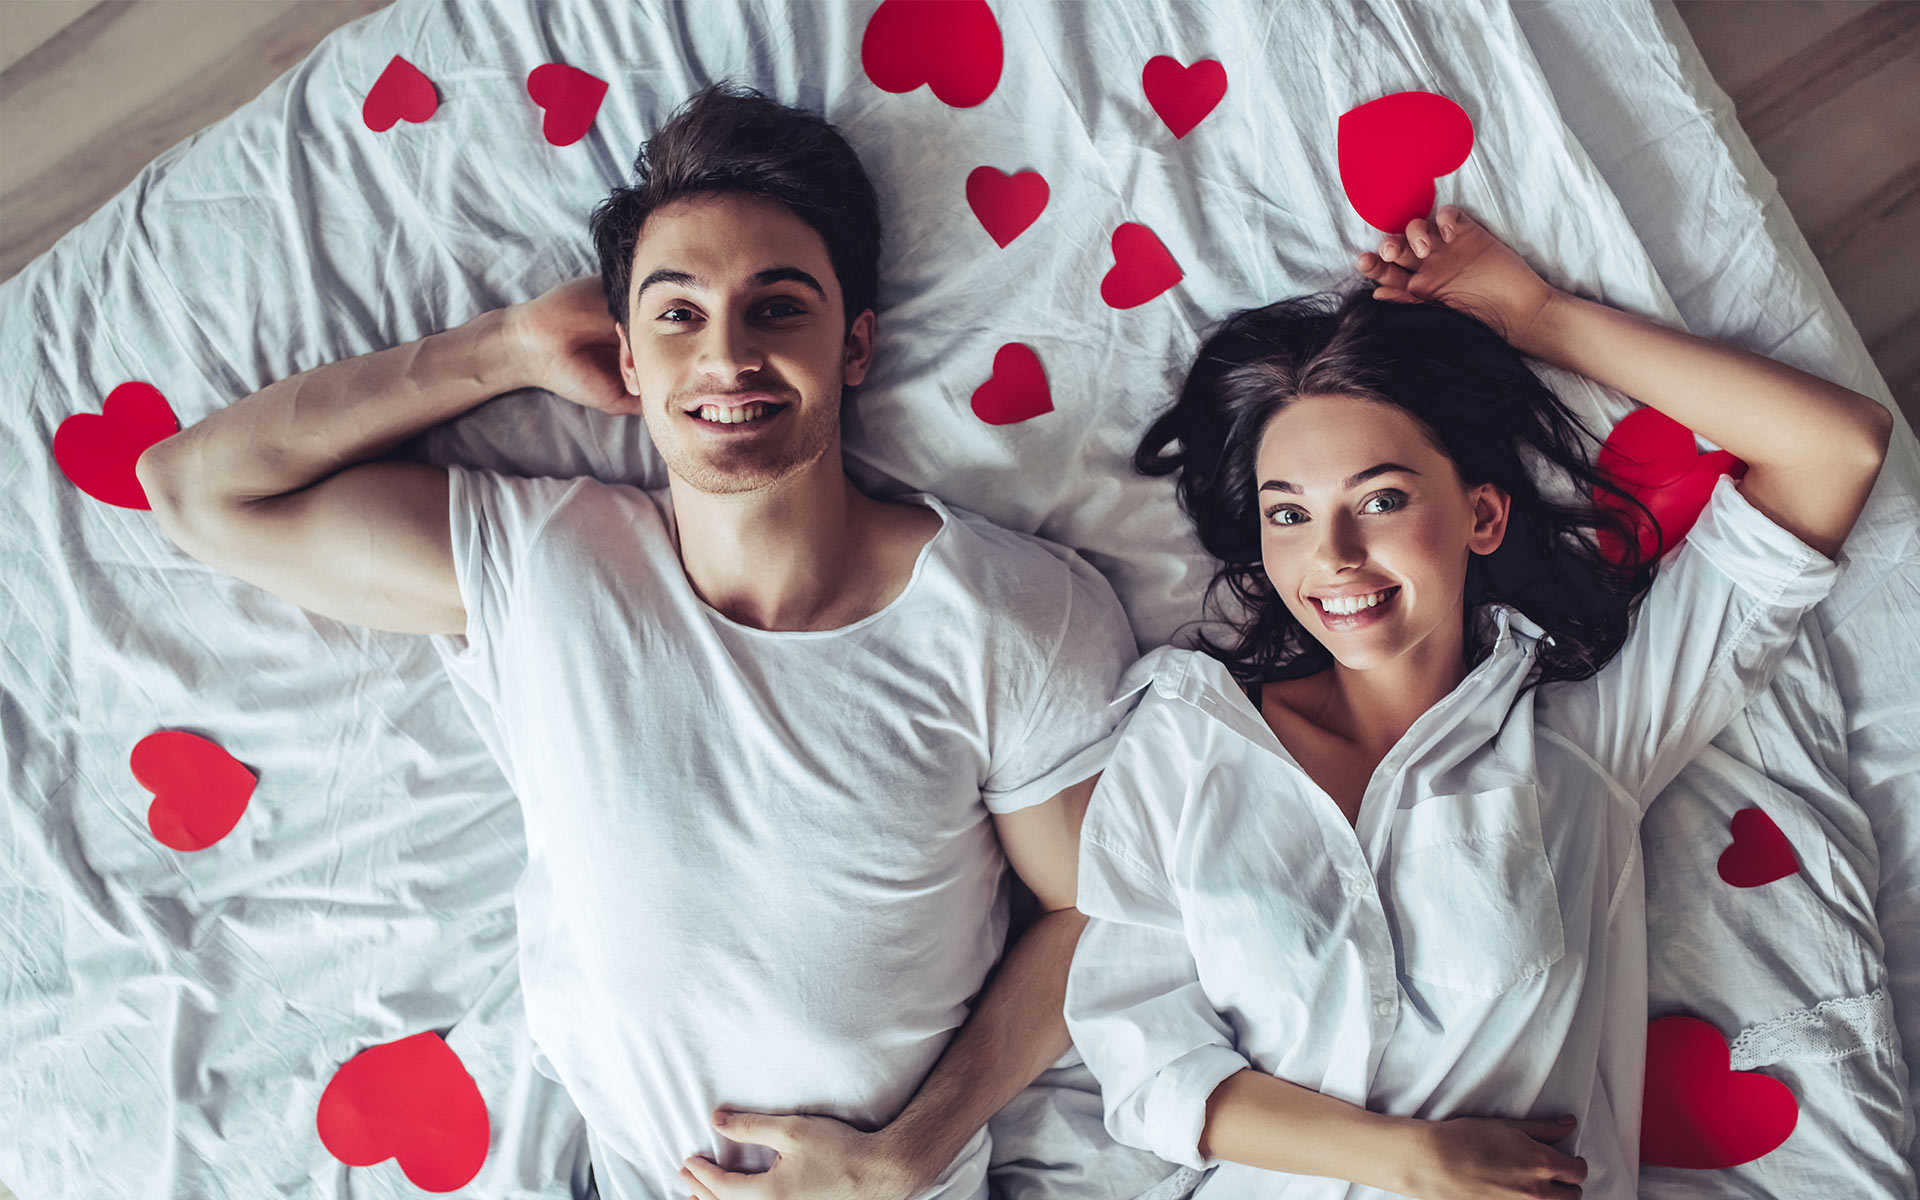 Brunette man and woman wearing white shirts lying next to each other in bed with red love-hearts around them, smiling.